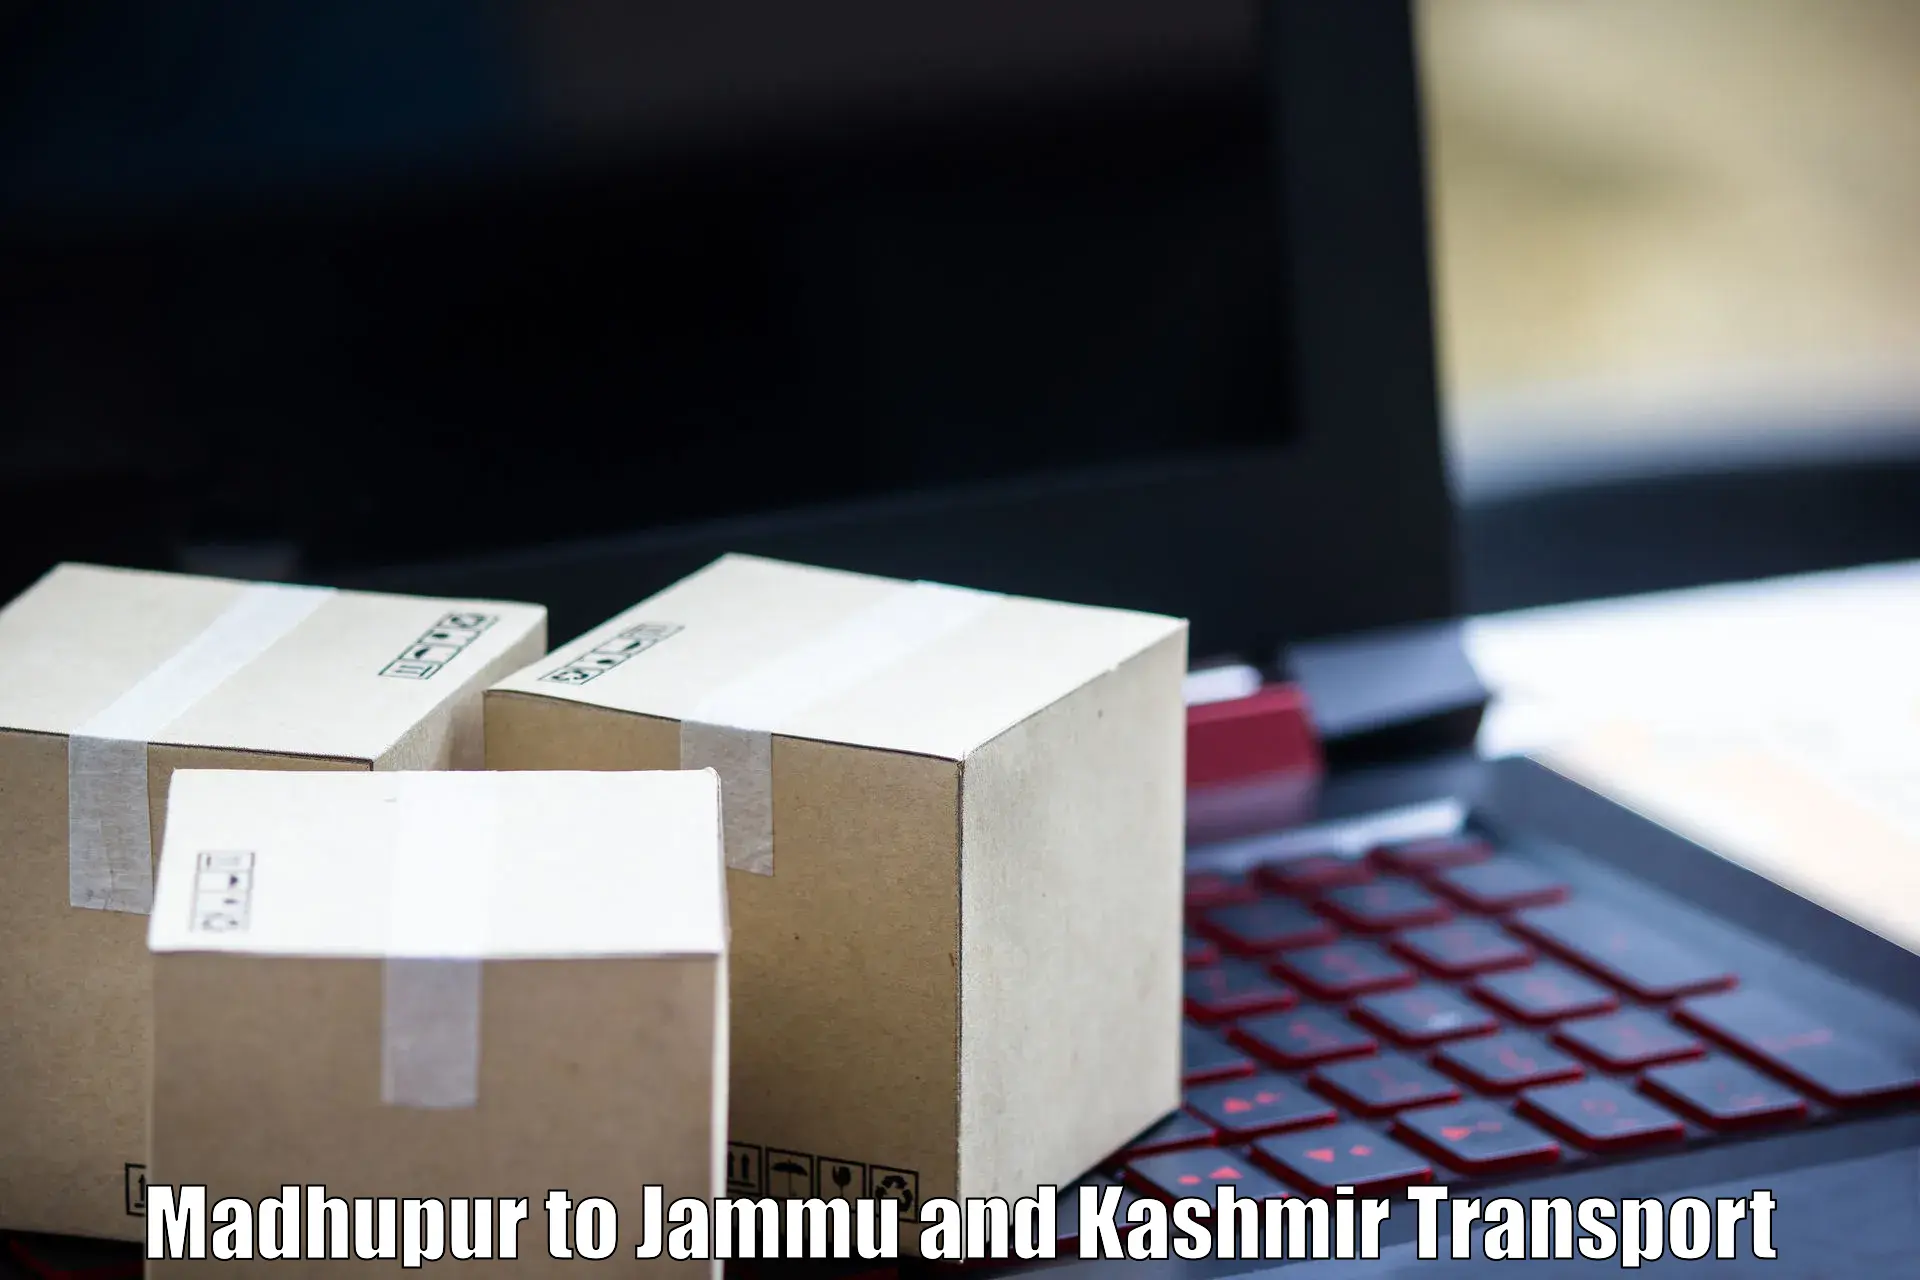 Nearby transport service Madhupur to Jammu and Kashmir